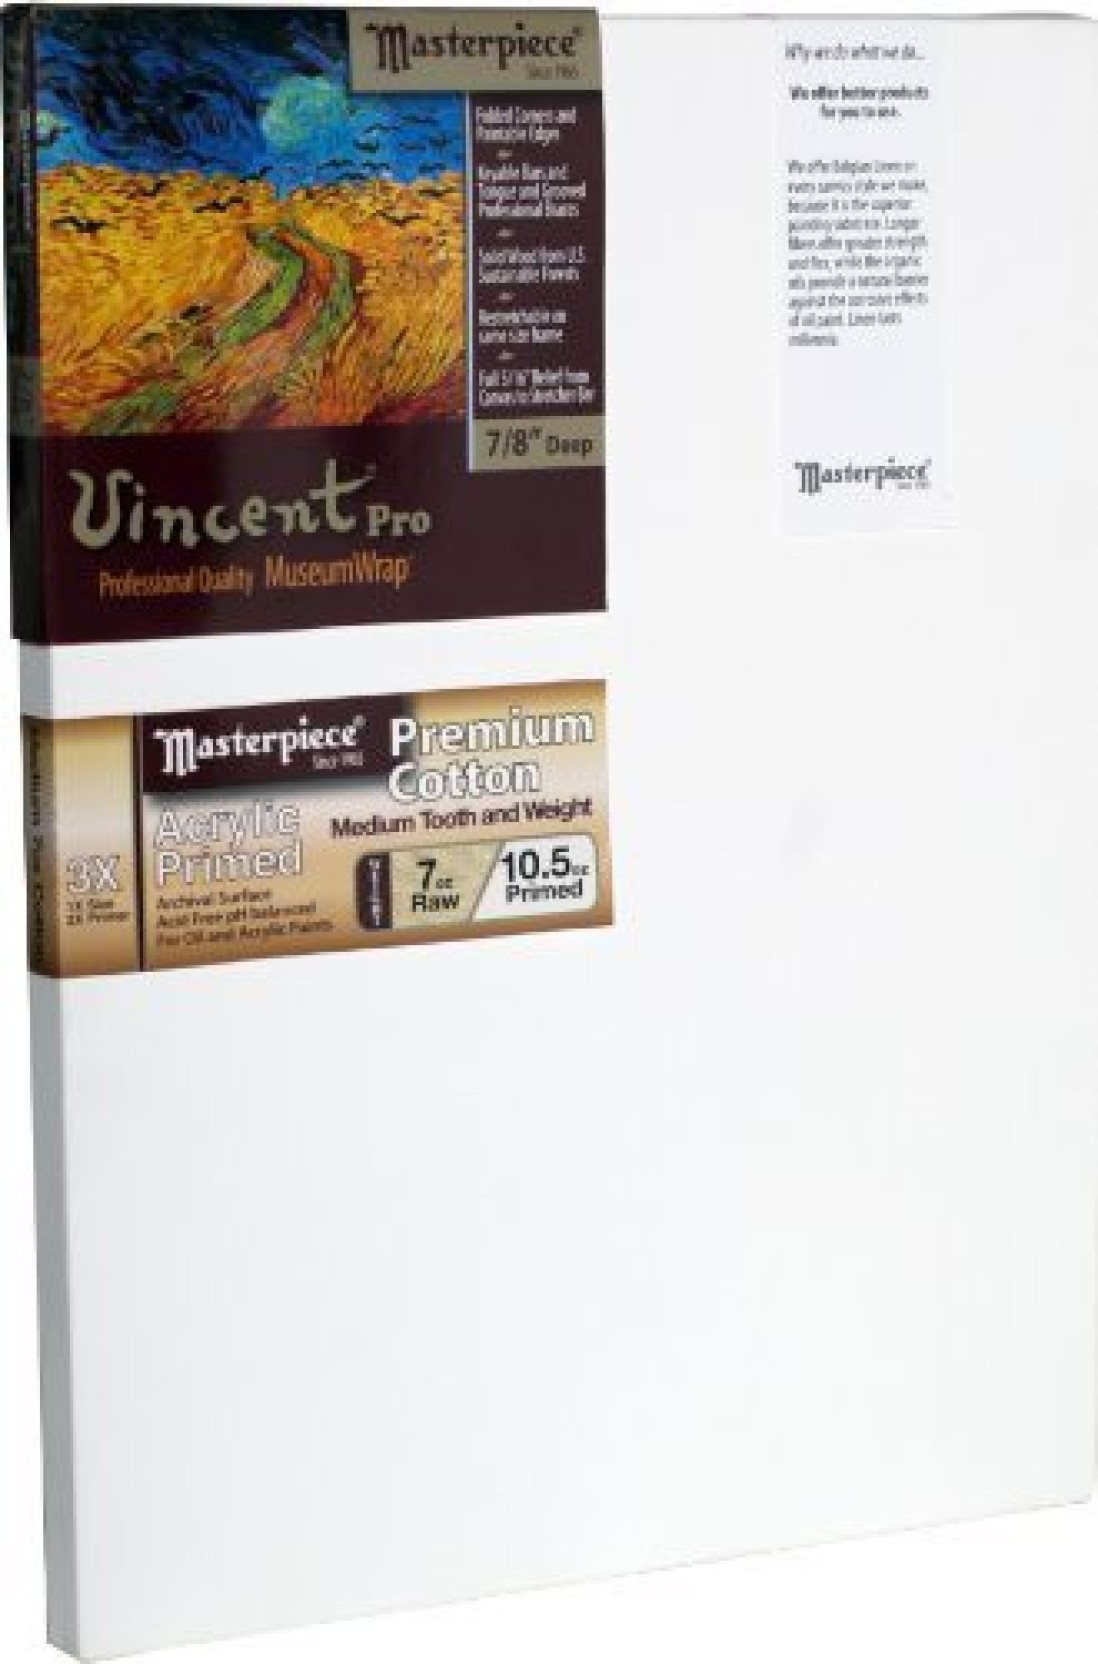 Masterpiece Monet Pro 12-Inch by 18-Inch Canvas with Primed 7-Ounce Monterey Cotton